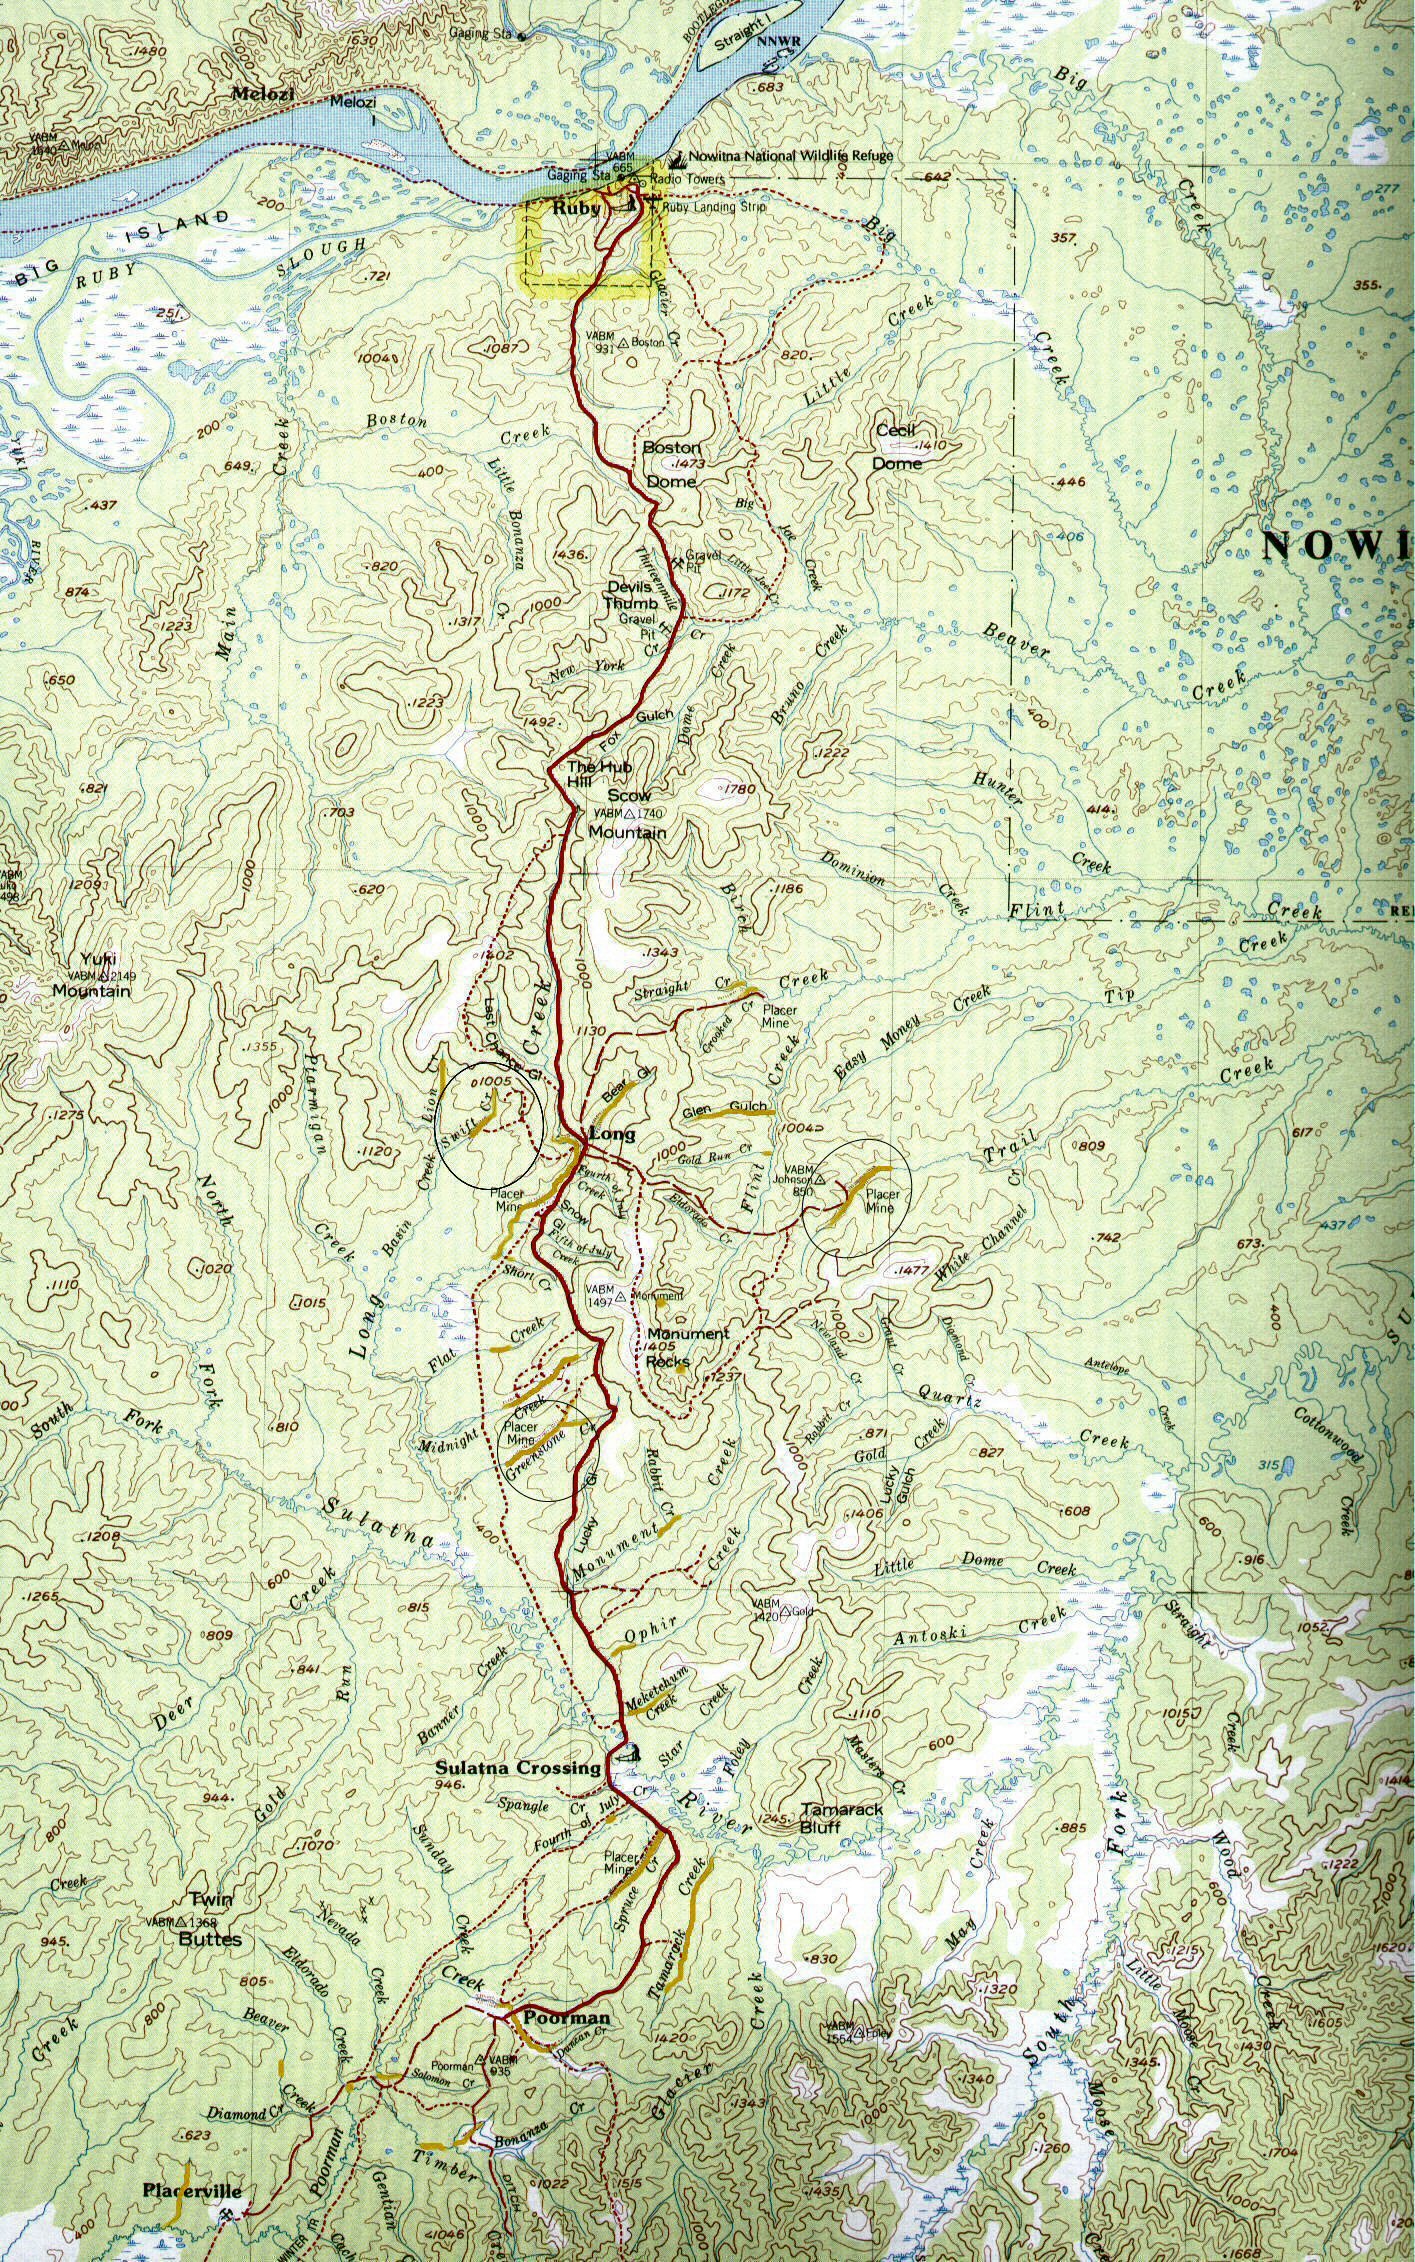 USGS map of the Ruby, Long  Poorman area.